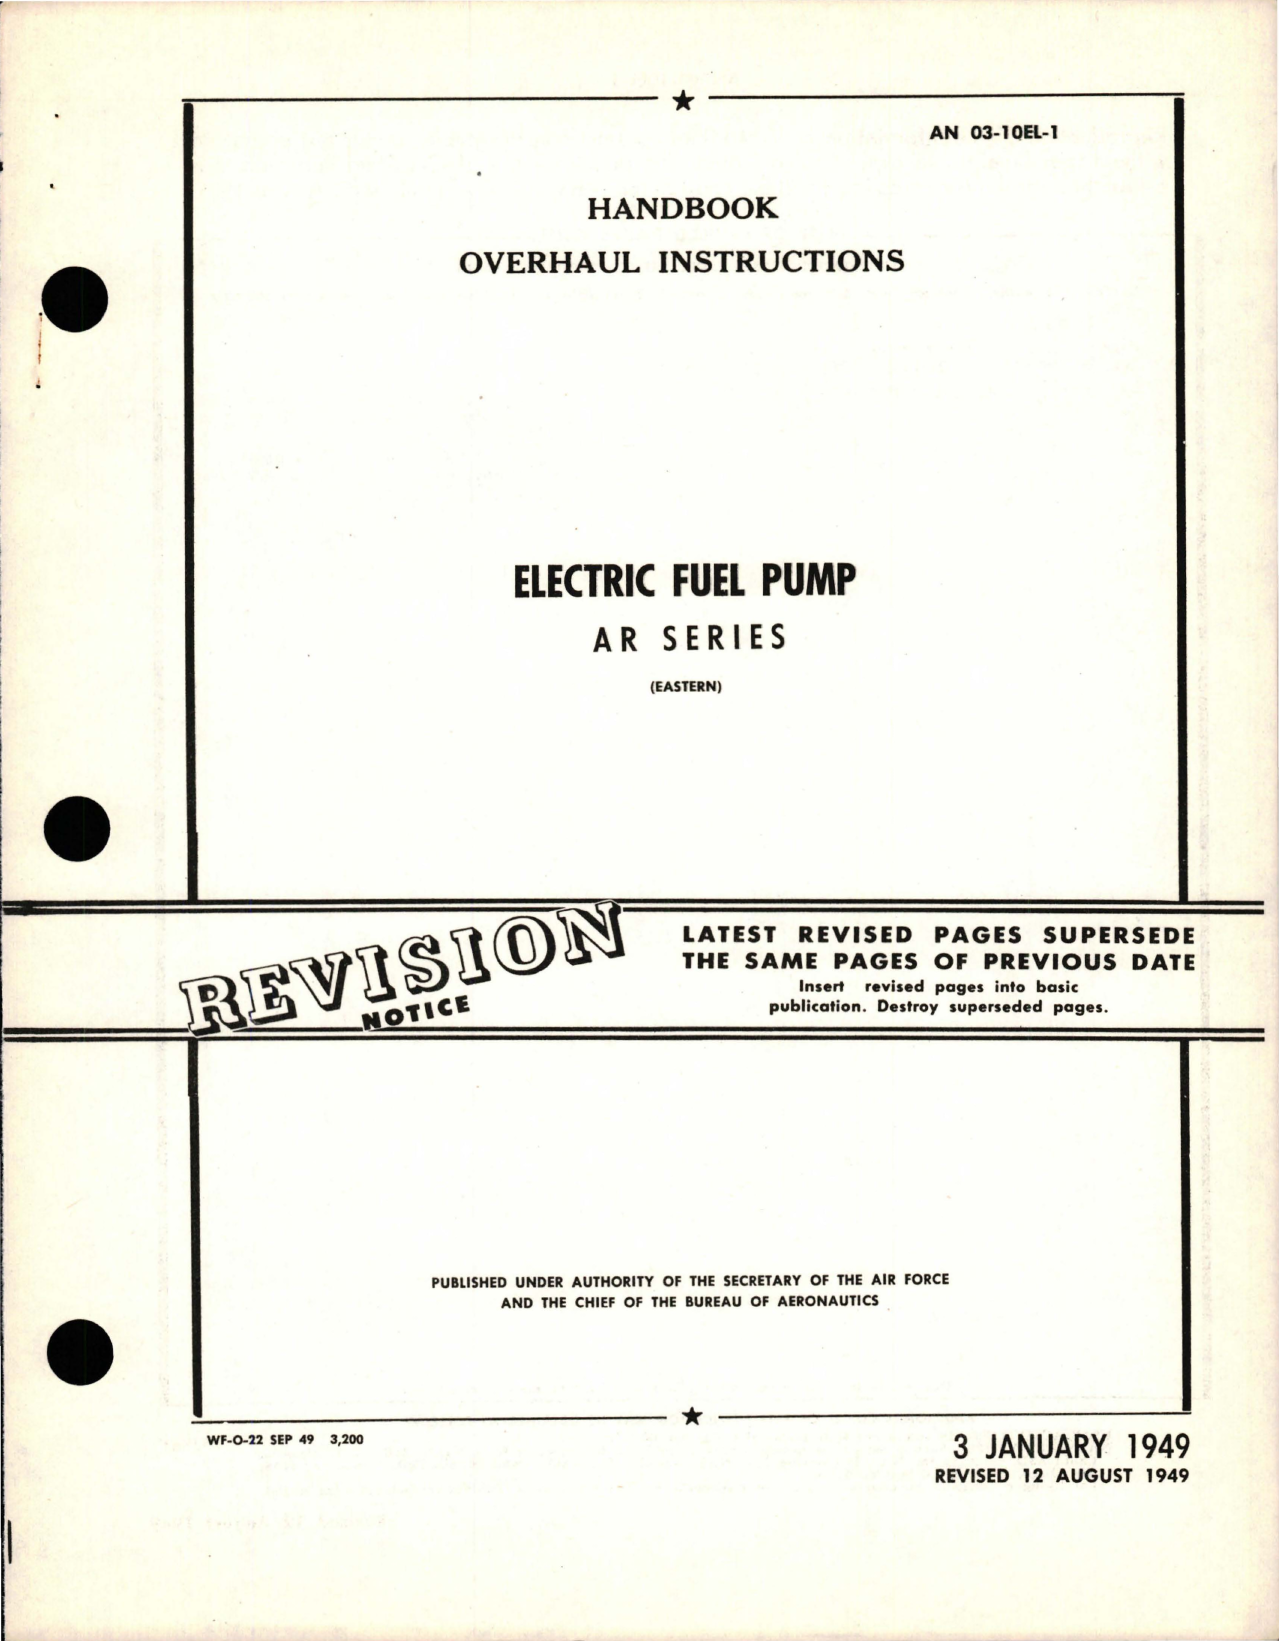 Sample page 1 from AirCorps Library document: Overhaul Instructions for Electric Fuel Pump - AR Series